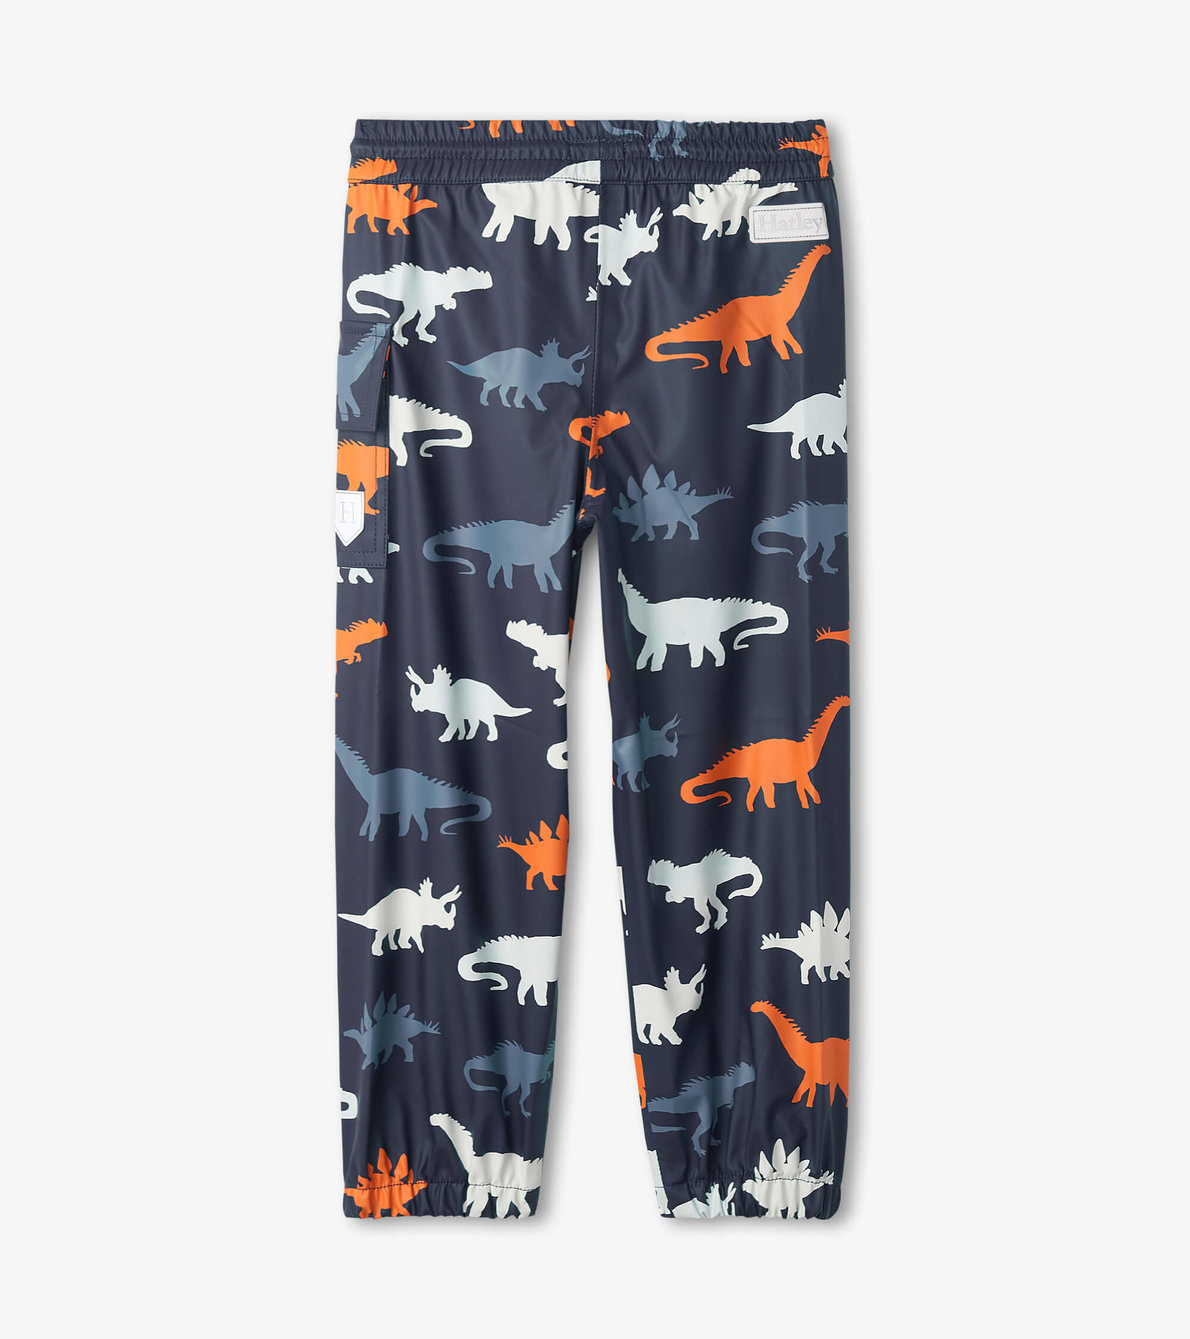 View larger image of Dino Silhouettes Colour Changing Kids Rain Pants